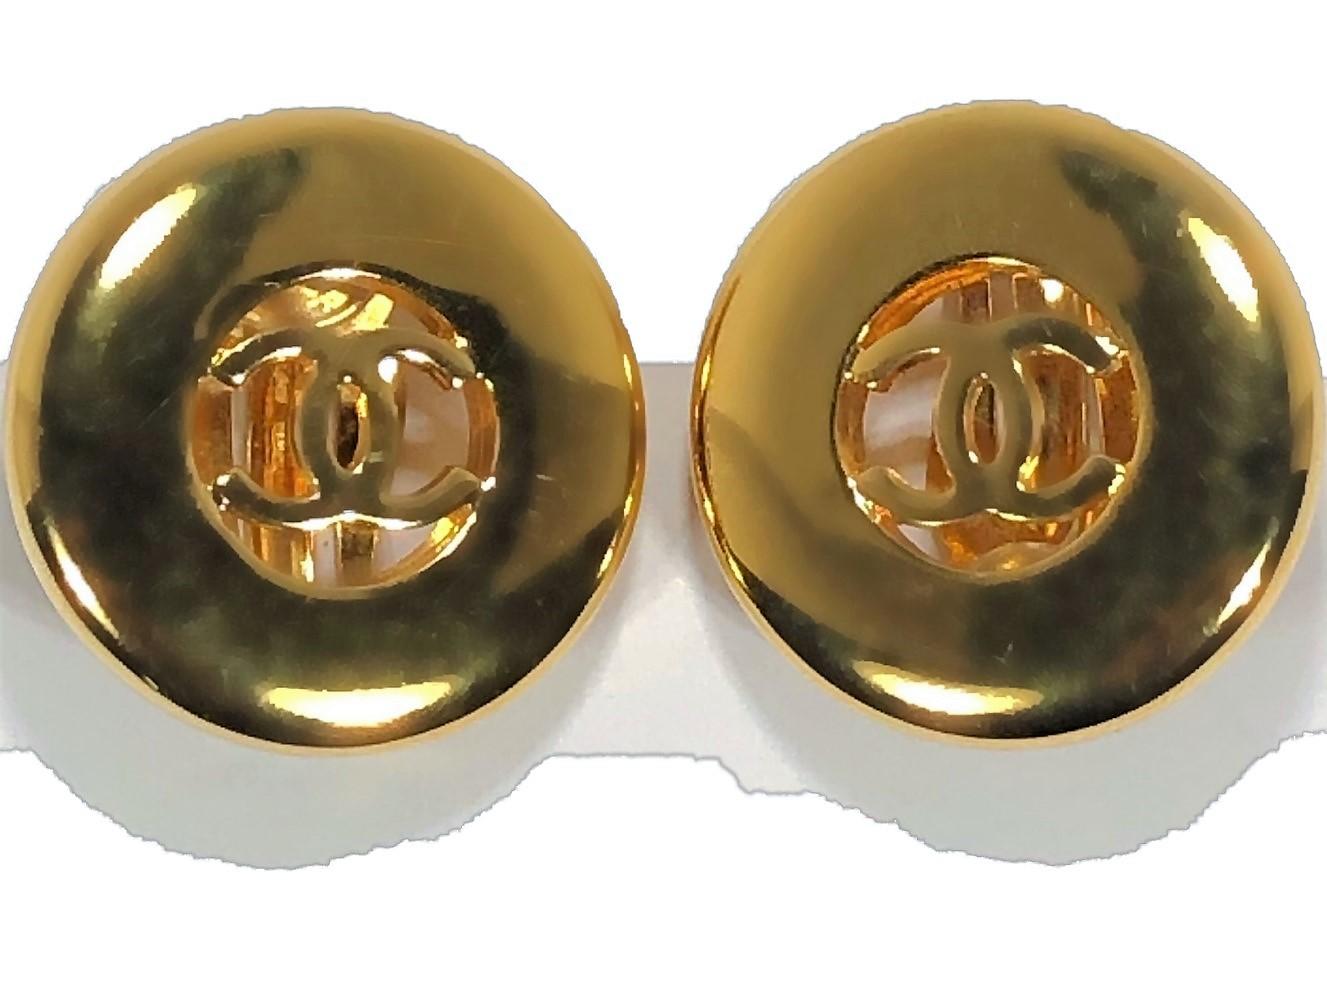 Lovely Gold Tone CC Chanel earrings from the spring 1997 collection. Measuring just under 1 inch at 15/16 inch diameter. The clips
are firm and tight.  Marked CHANEL 97A  MADE IN FRANCE. 